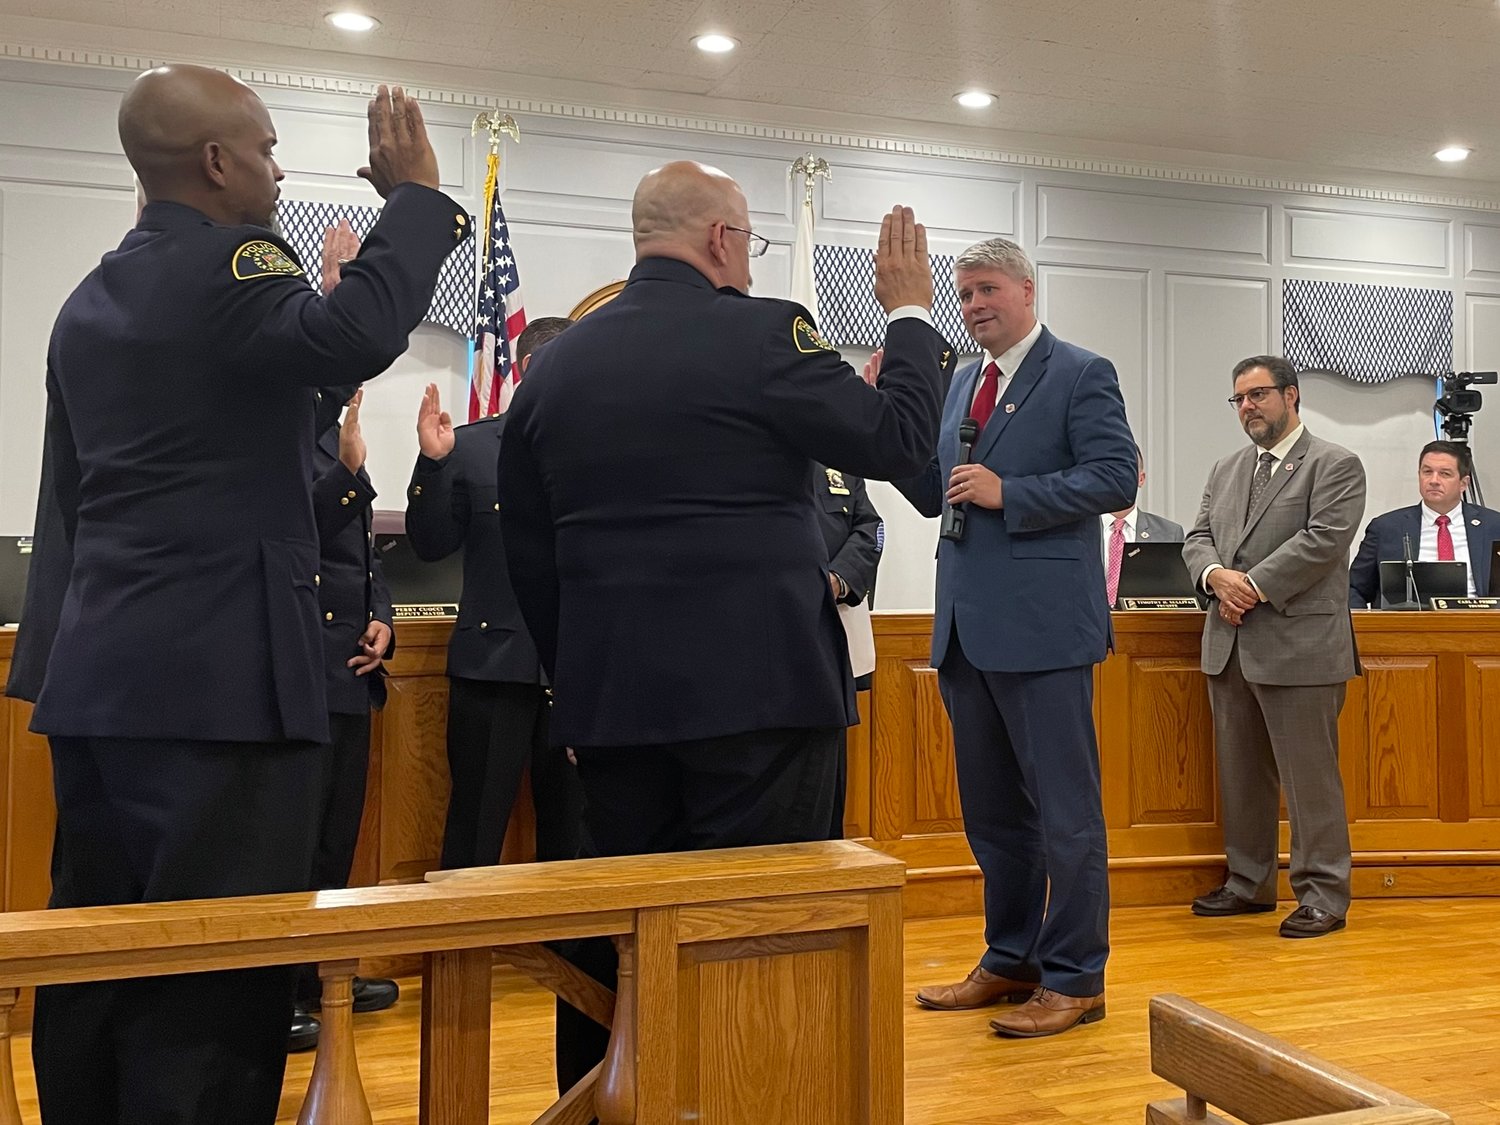 Mayor Keith Corbett administered the oath to Malverne’s new reserve police officers at the village’s monthly board of trustees meeting.